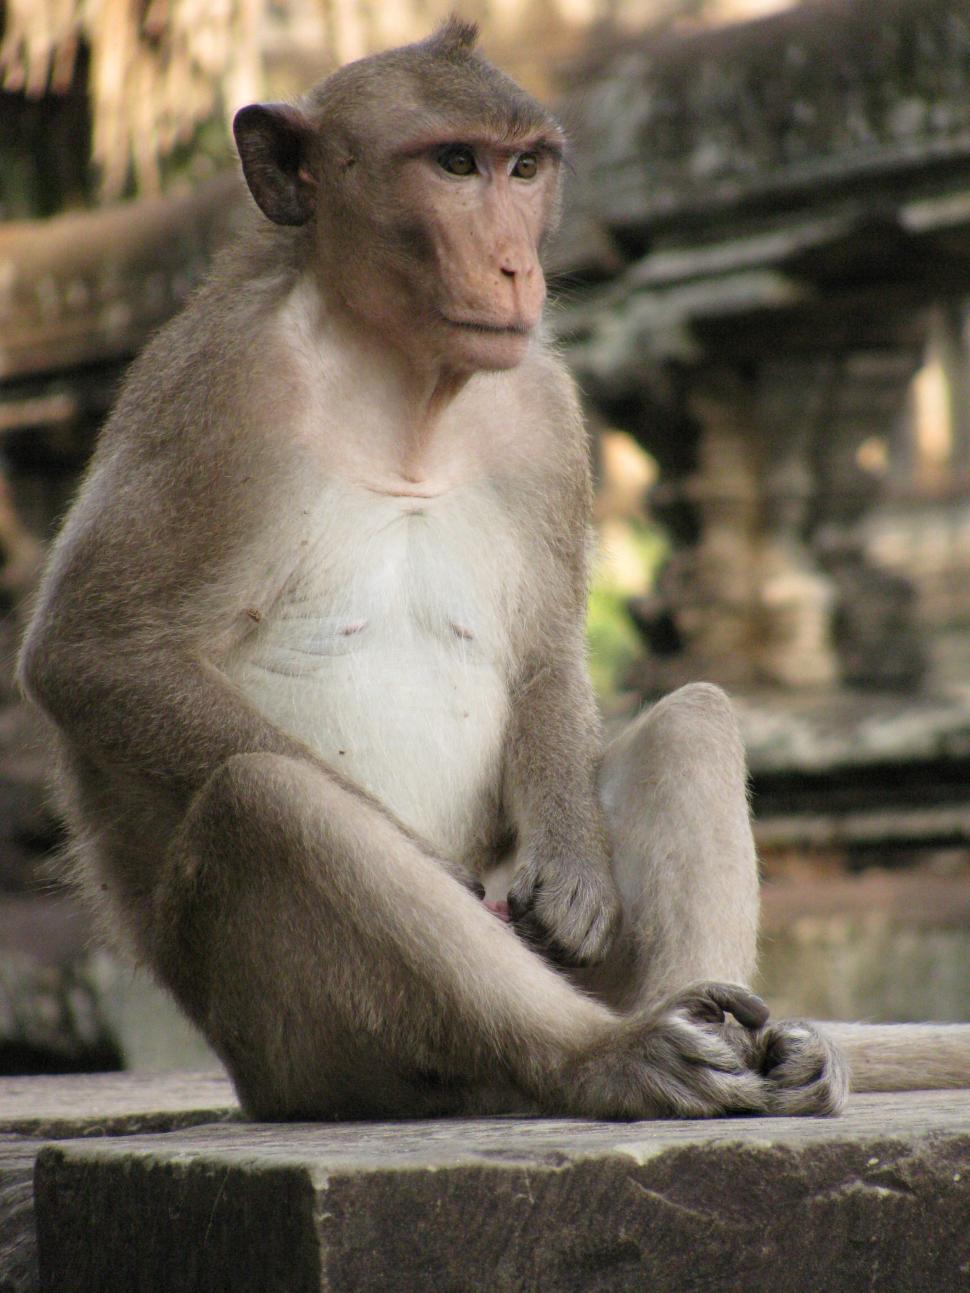 Free Image of Monkey Sitting on Ledge in Front of Building 